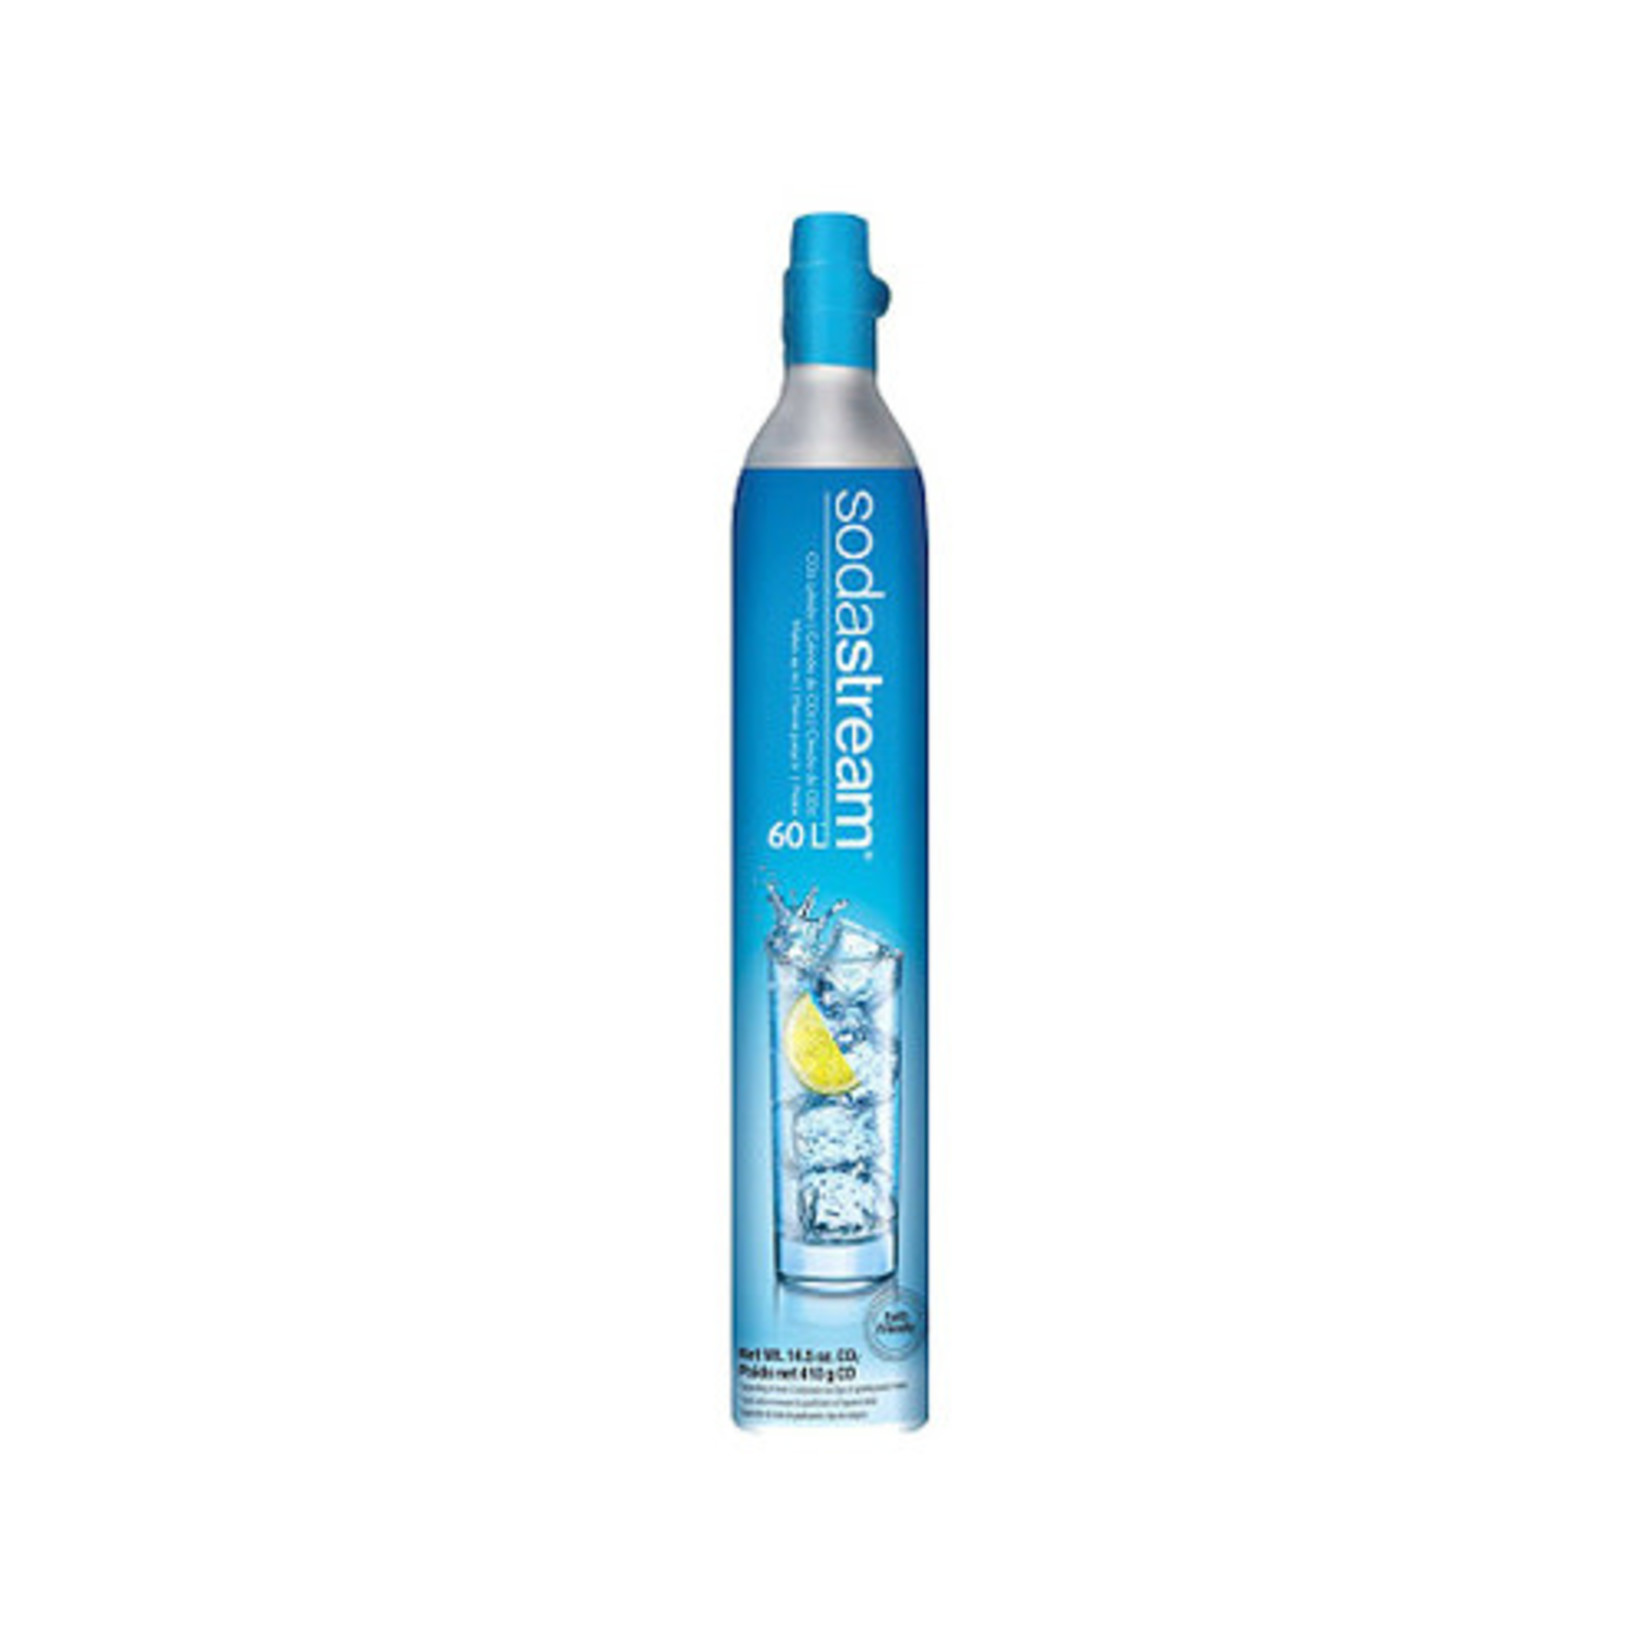 SODASTREAM CYLINDRE CO2 DE REMPLACEMENT 60 LITRES